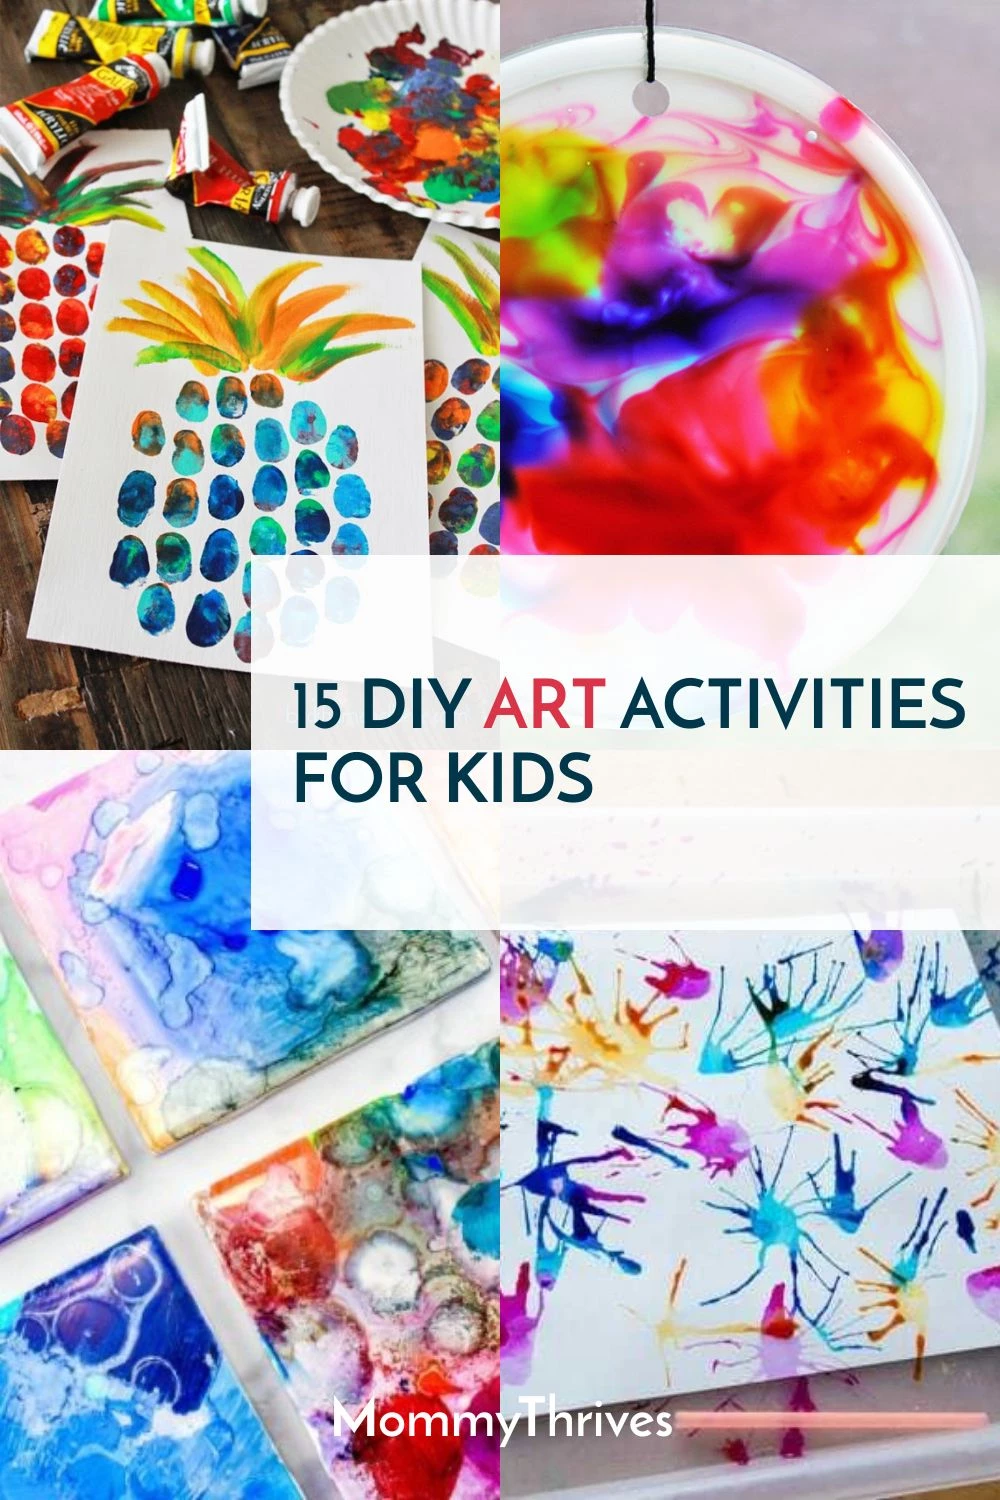 Fascinating Art Projects For Kids To Express Creativity - Playtivities